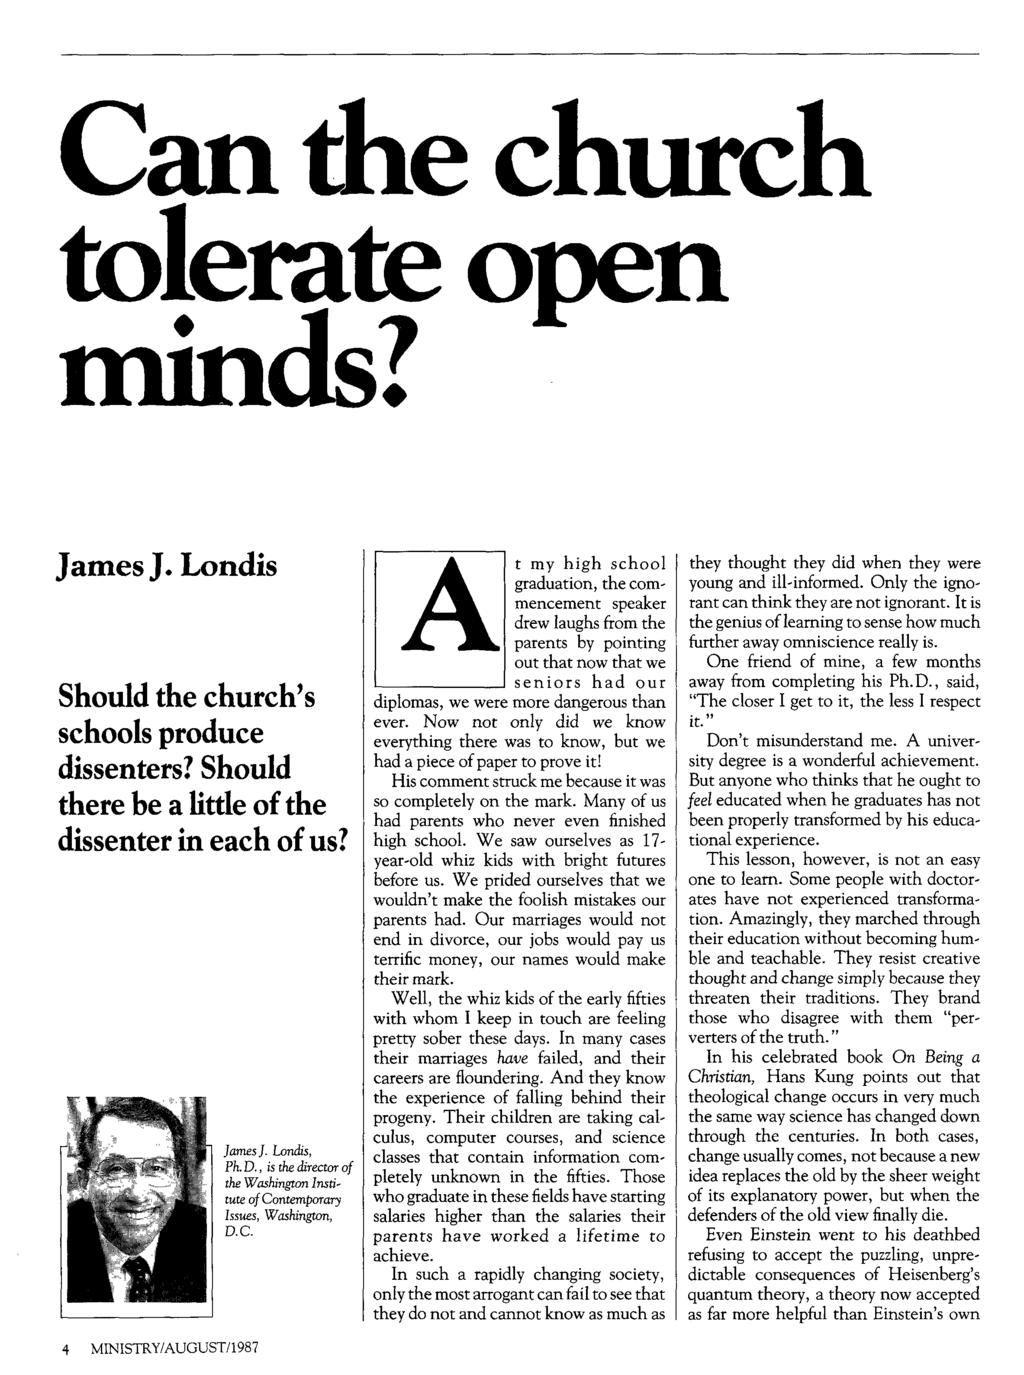 Can die church tolerate open minds? James J. Londis Should the church's schools produce dissenters? Should there be a little of the dissenter in each of us? 4 MINISTRY/AUGUST/1987 James J. Londis, Ph.